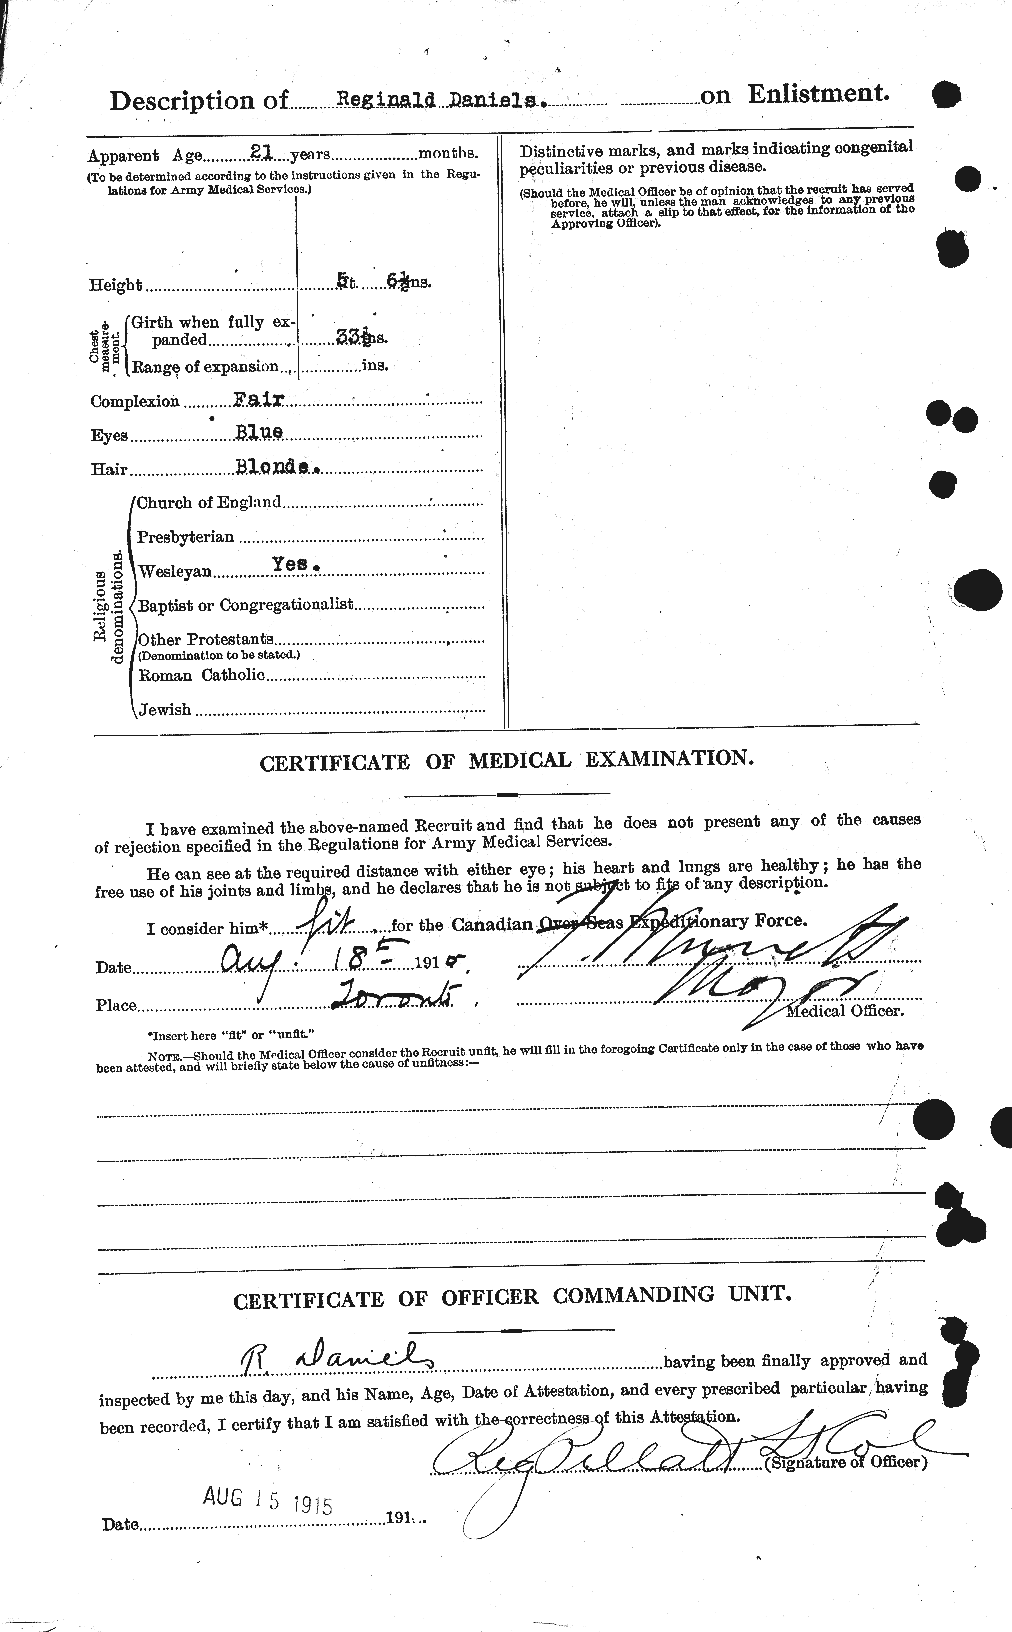 Personnel Records of the First World War - CEF 279666b